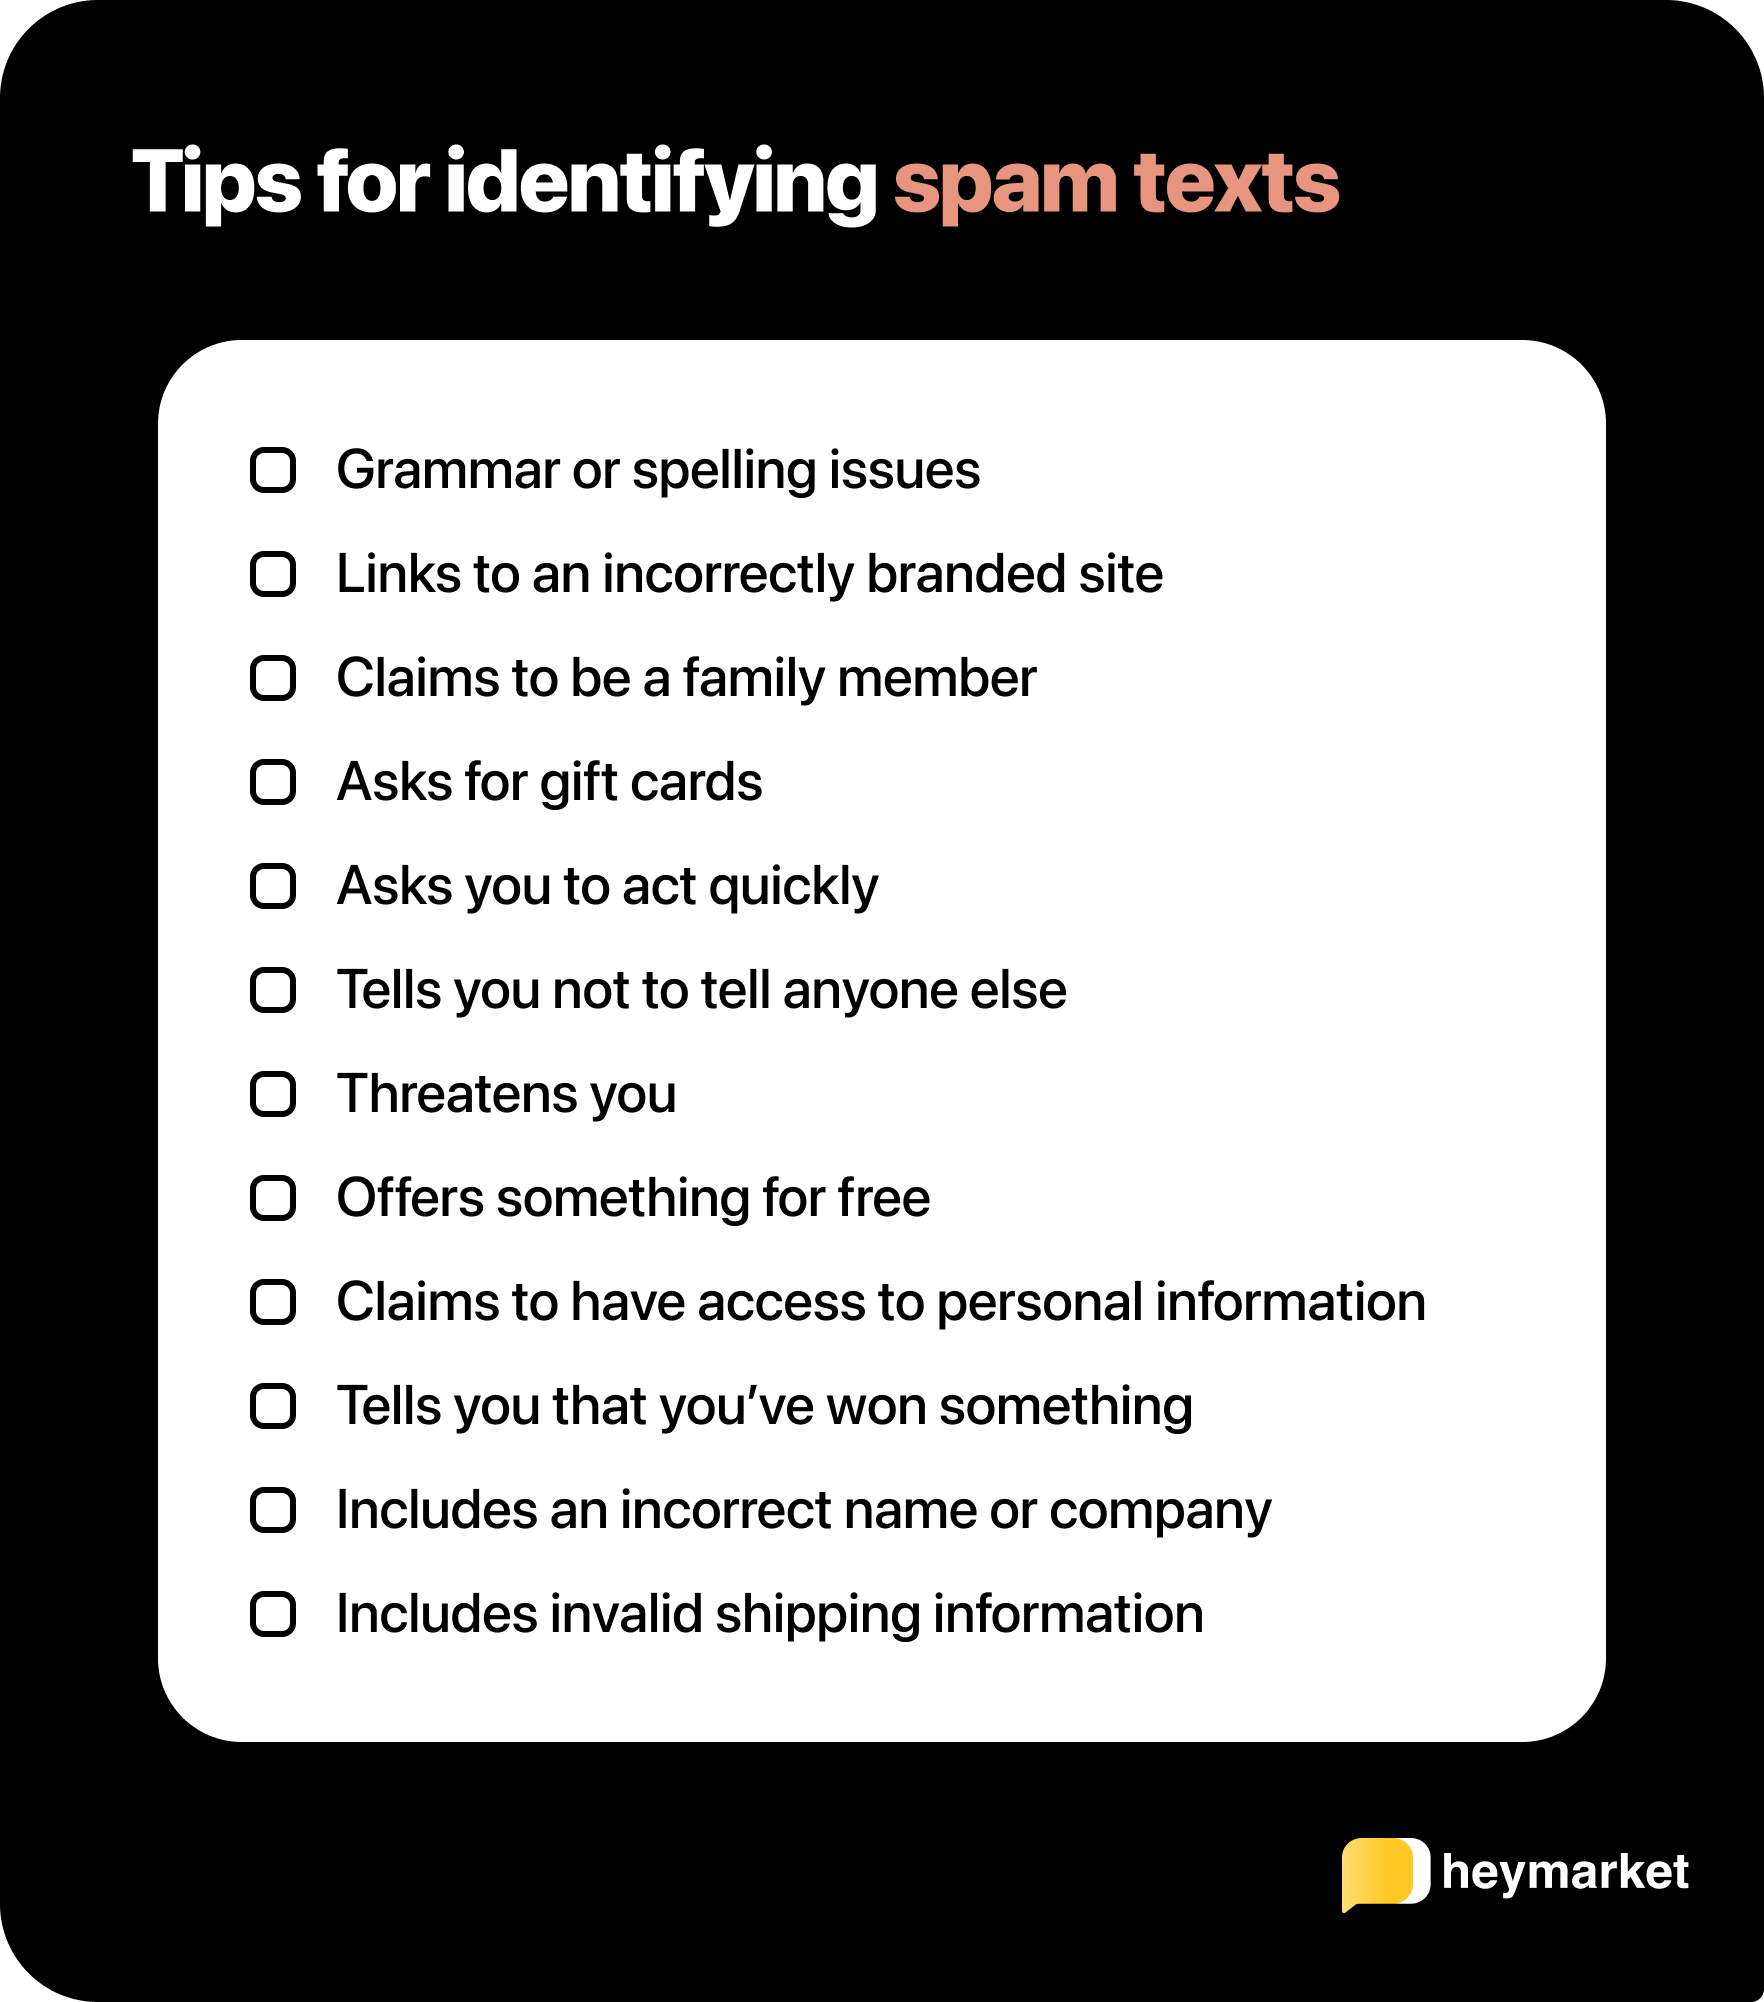 List of tips for identifying spam texts